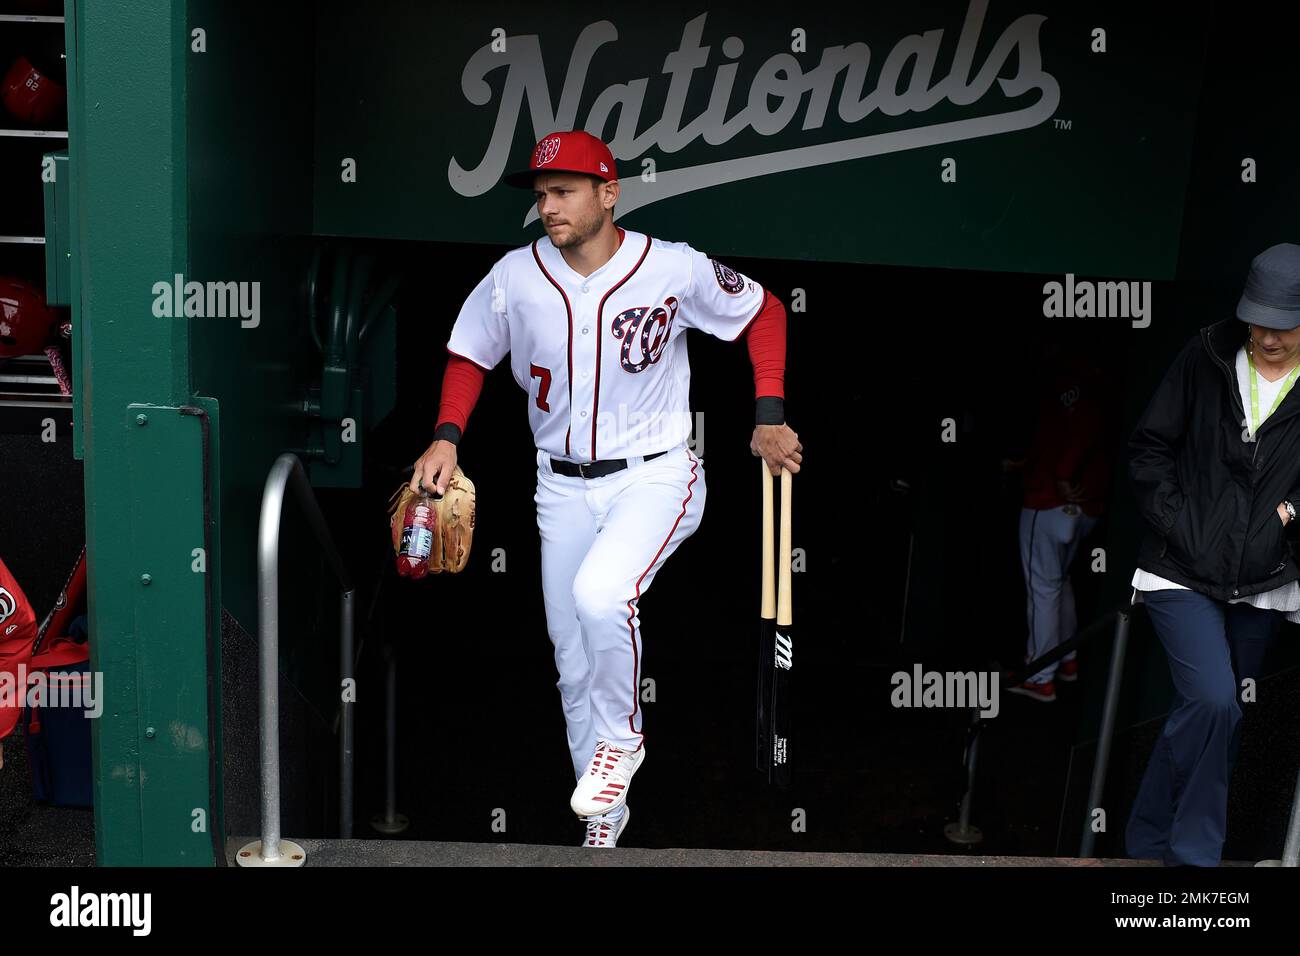 Washington Nationals shortstop Trea Turner in the dugout before a